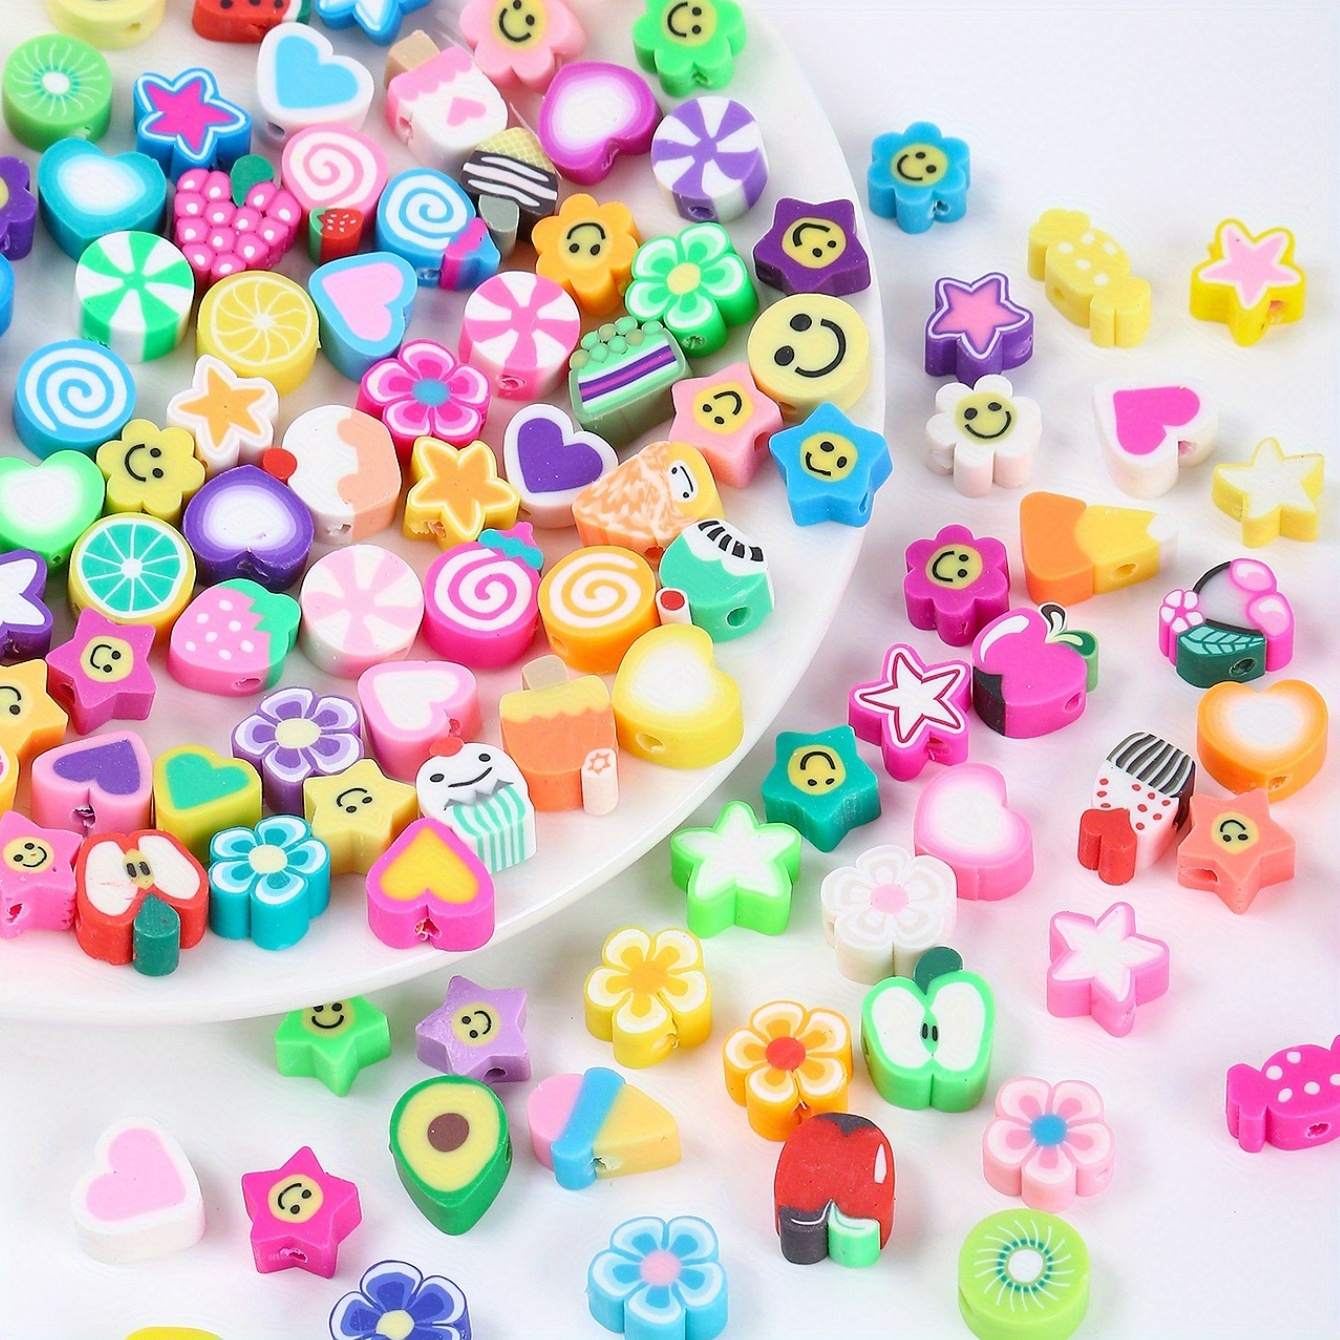 100pcs Cute Fruit Beads, 10mm Handmade Polymer Clay Beads Fruit Beads for DIY Bracelet Necklace Earring Hairpin Jewellery Making Kit for Girls